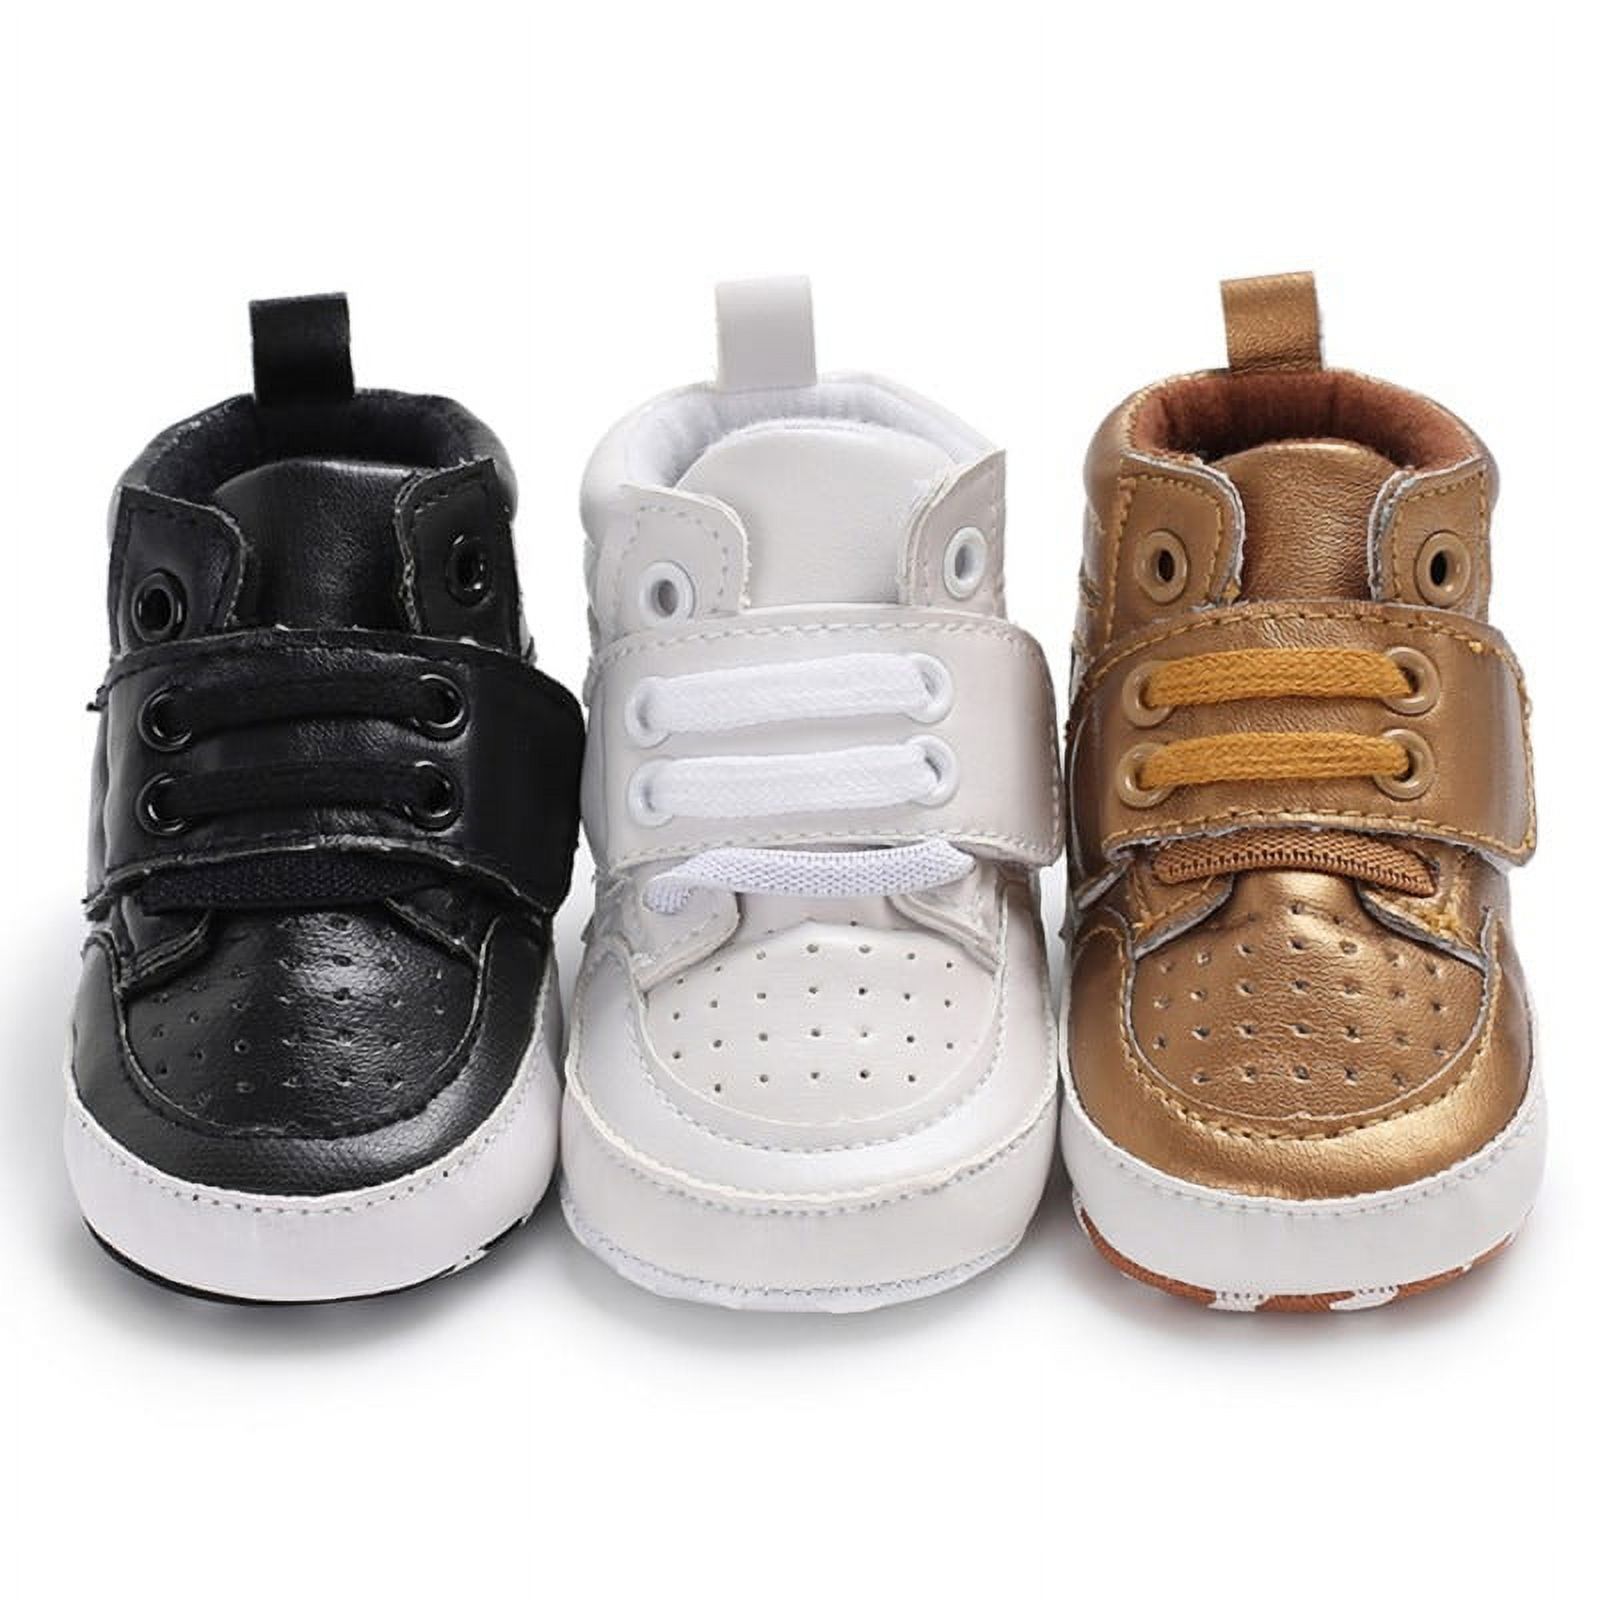 zhongxinda 0-18M Newly Fashion First Walkers Baby Boys Casual Shoes Infant Newborn Kids Soft Toddler Shoes Baby Shoes - image 3 of 6